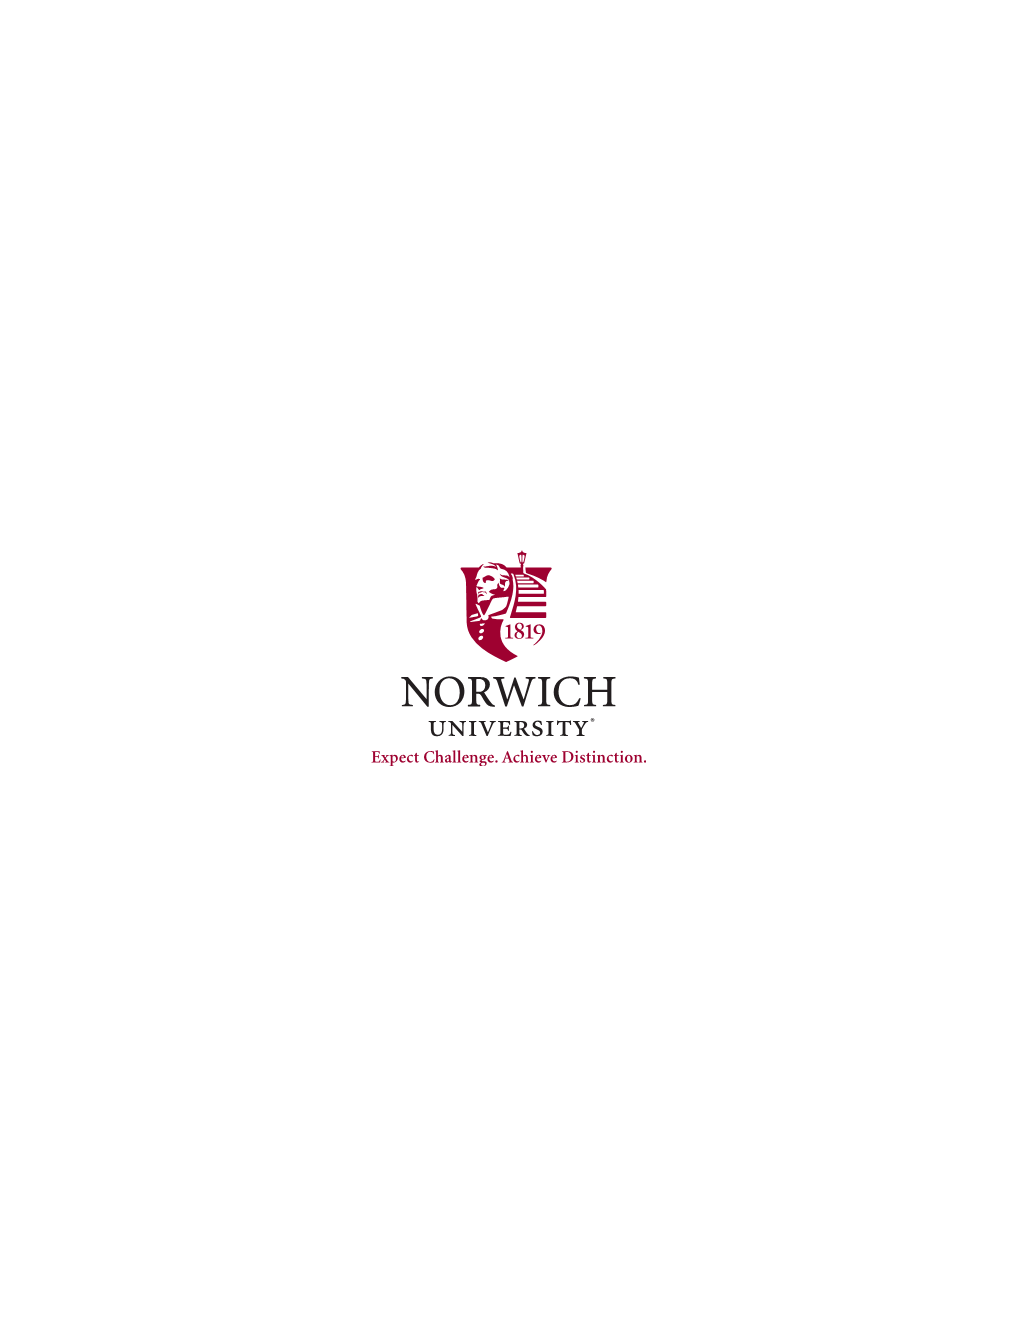 The Commencement of NORWICH UNIVERSITY